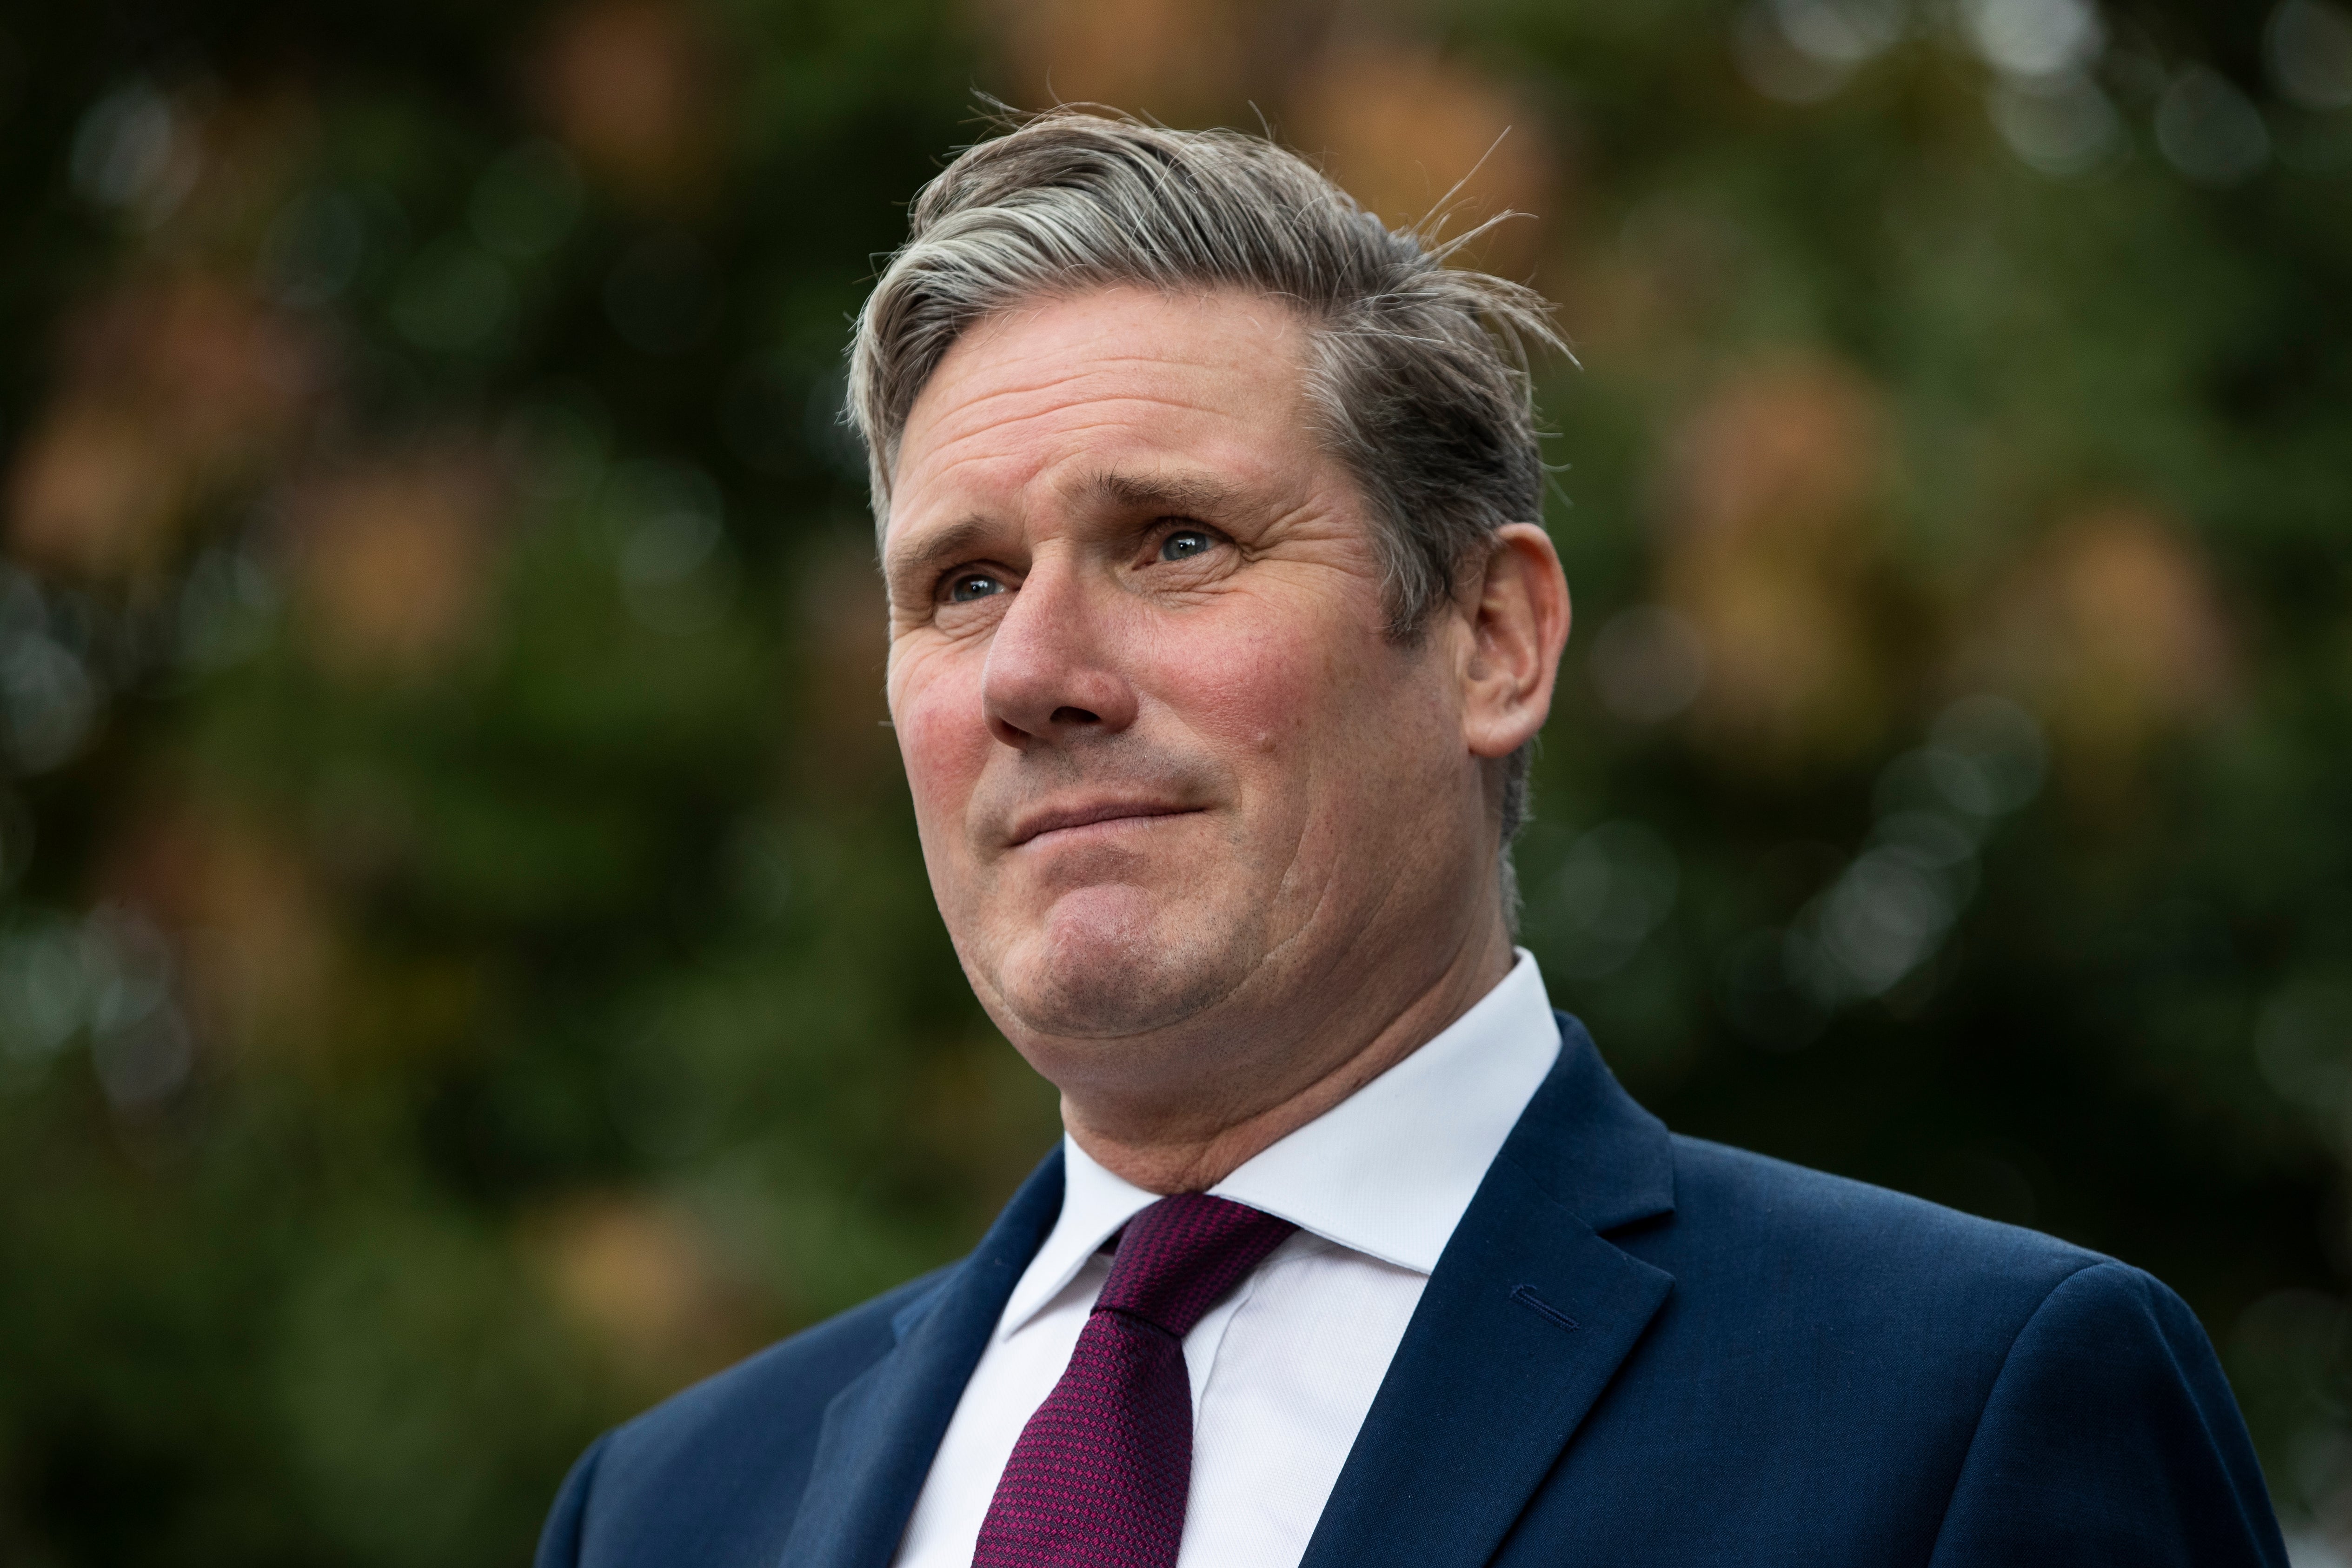 Keir Starmer responds to PM's conference speech